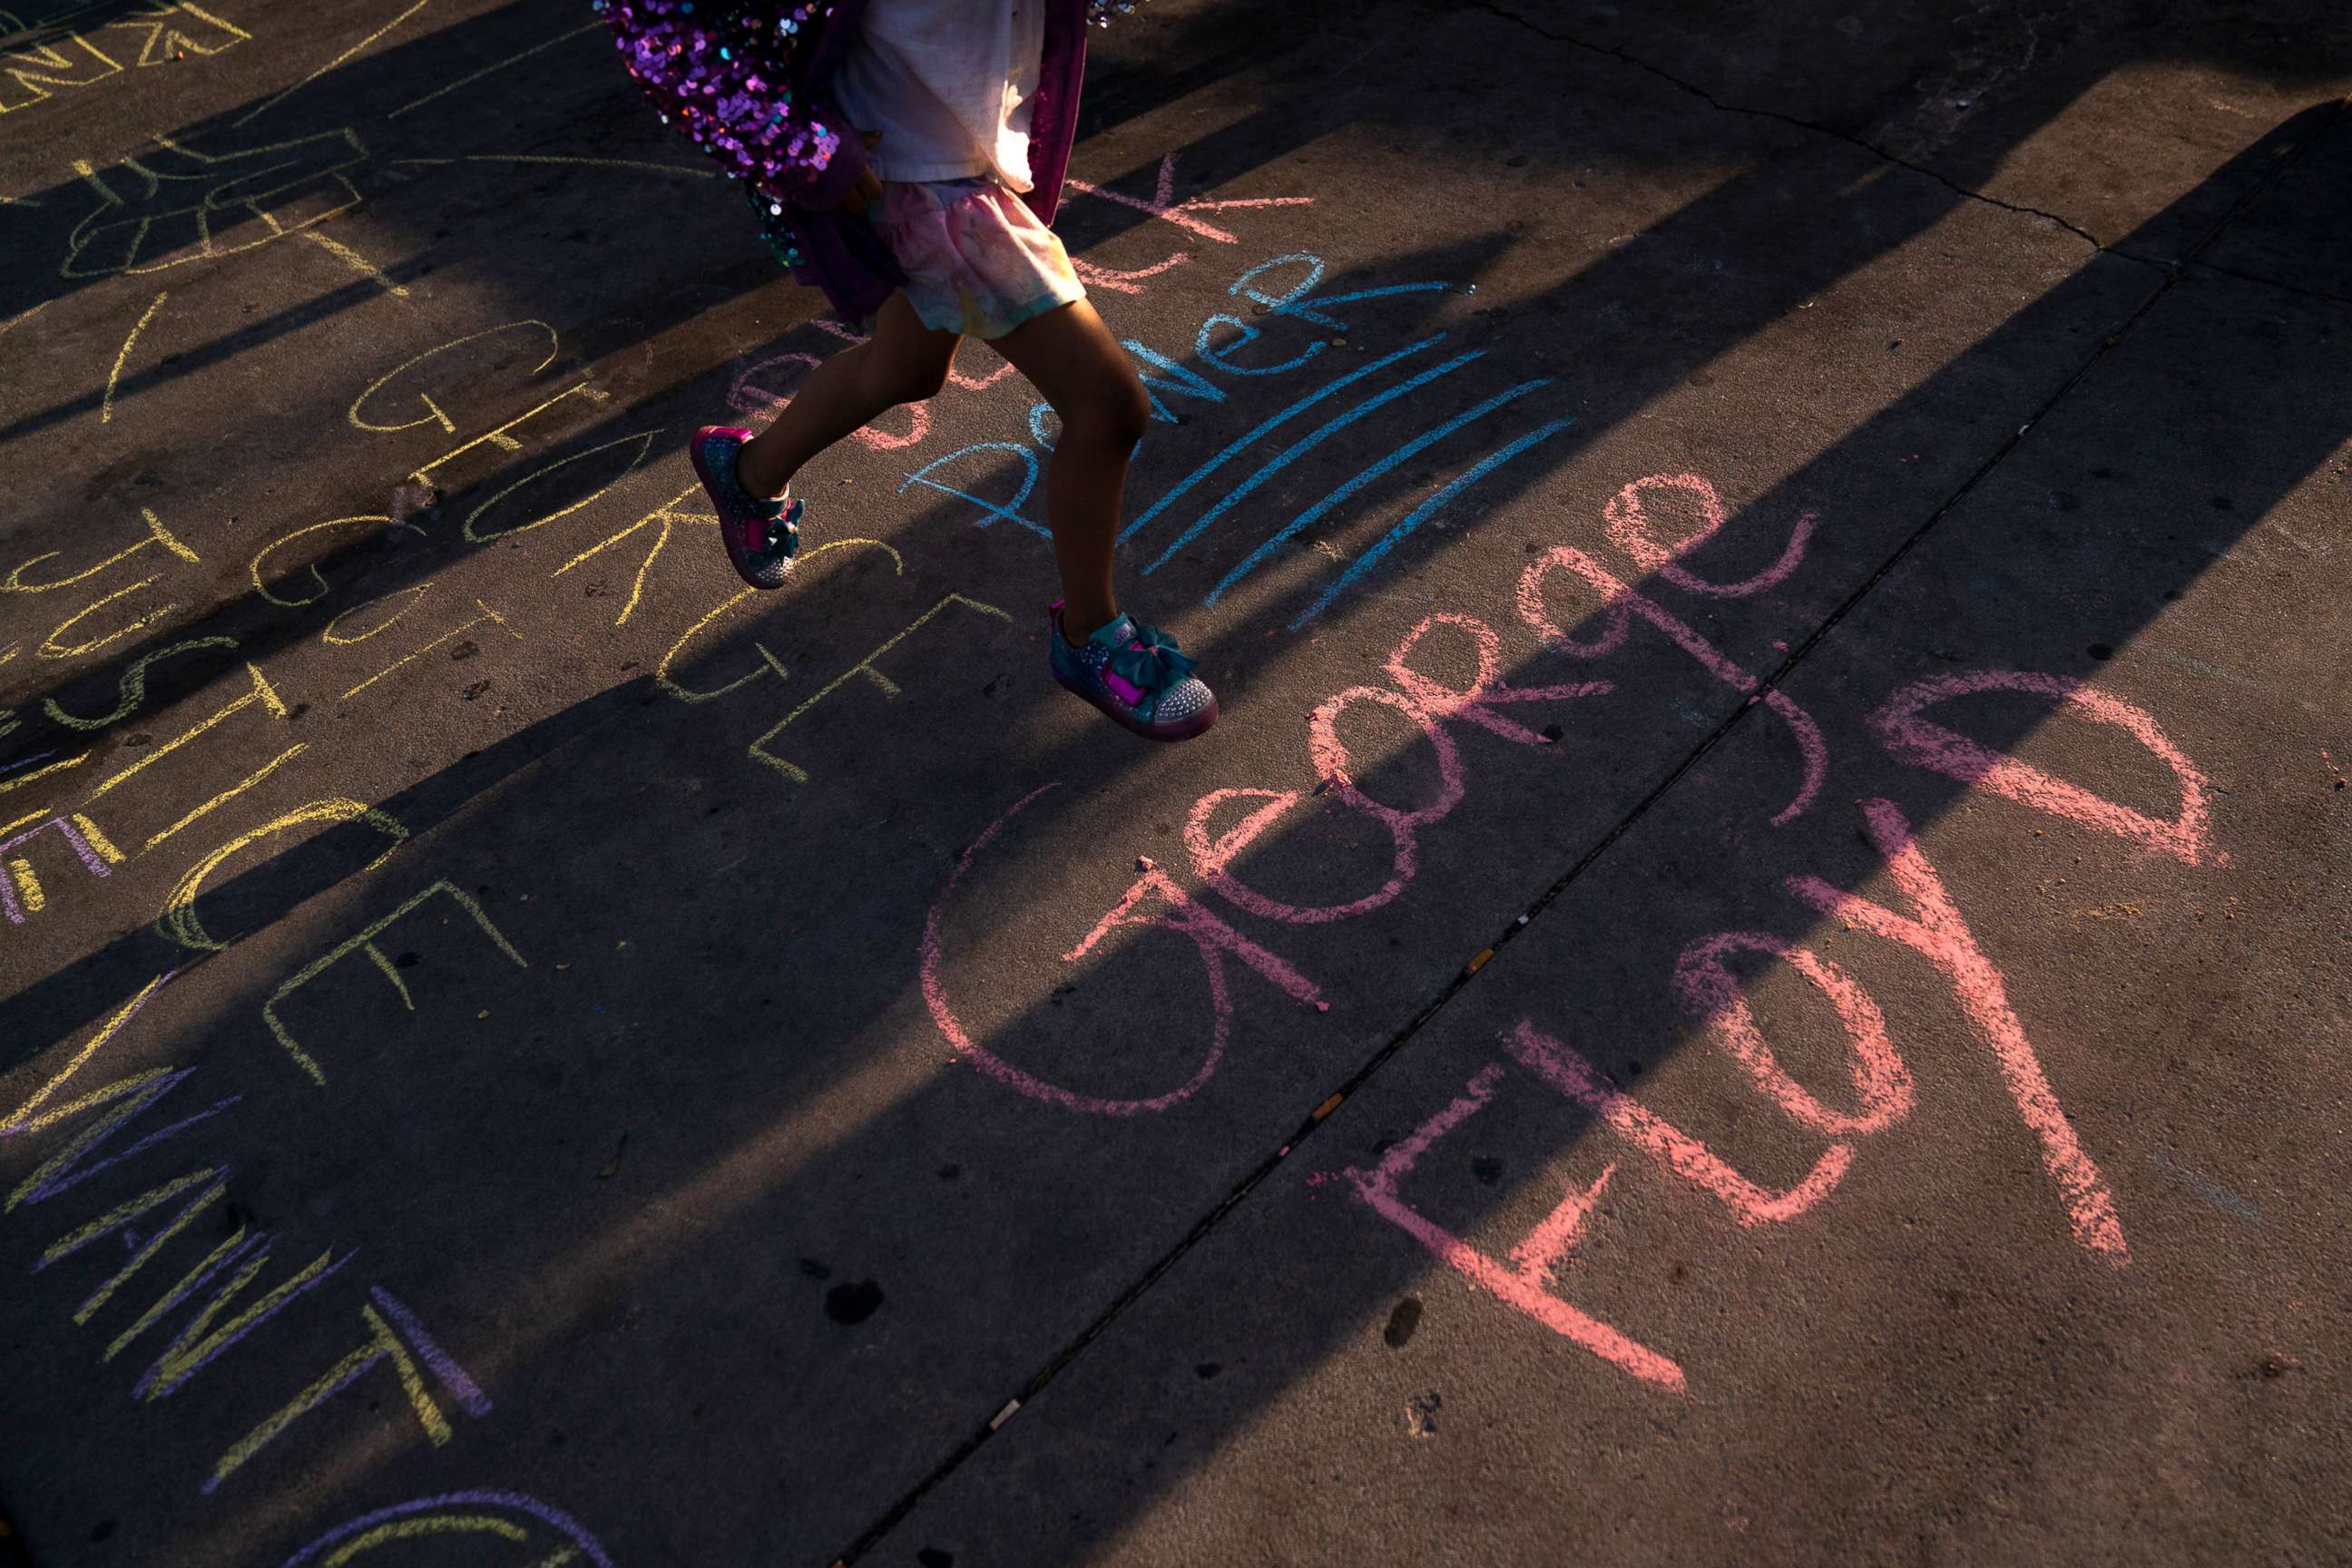 PHOTO: George Floyd's name is written on a sidewalk near the intersection of Florence and Normandie Avenues in Los Angeles, April 20, 2021, after a guilty verdict was announced at the trial of former Minneapolis police Officer Derek Chauvin.